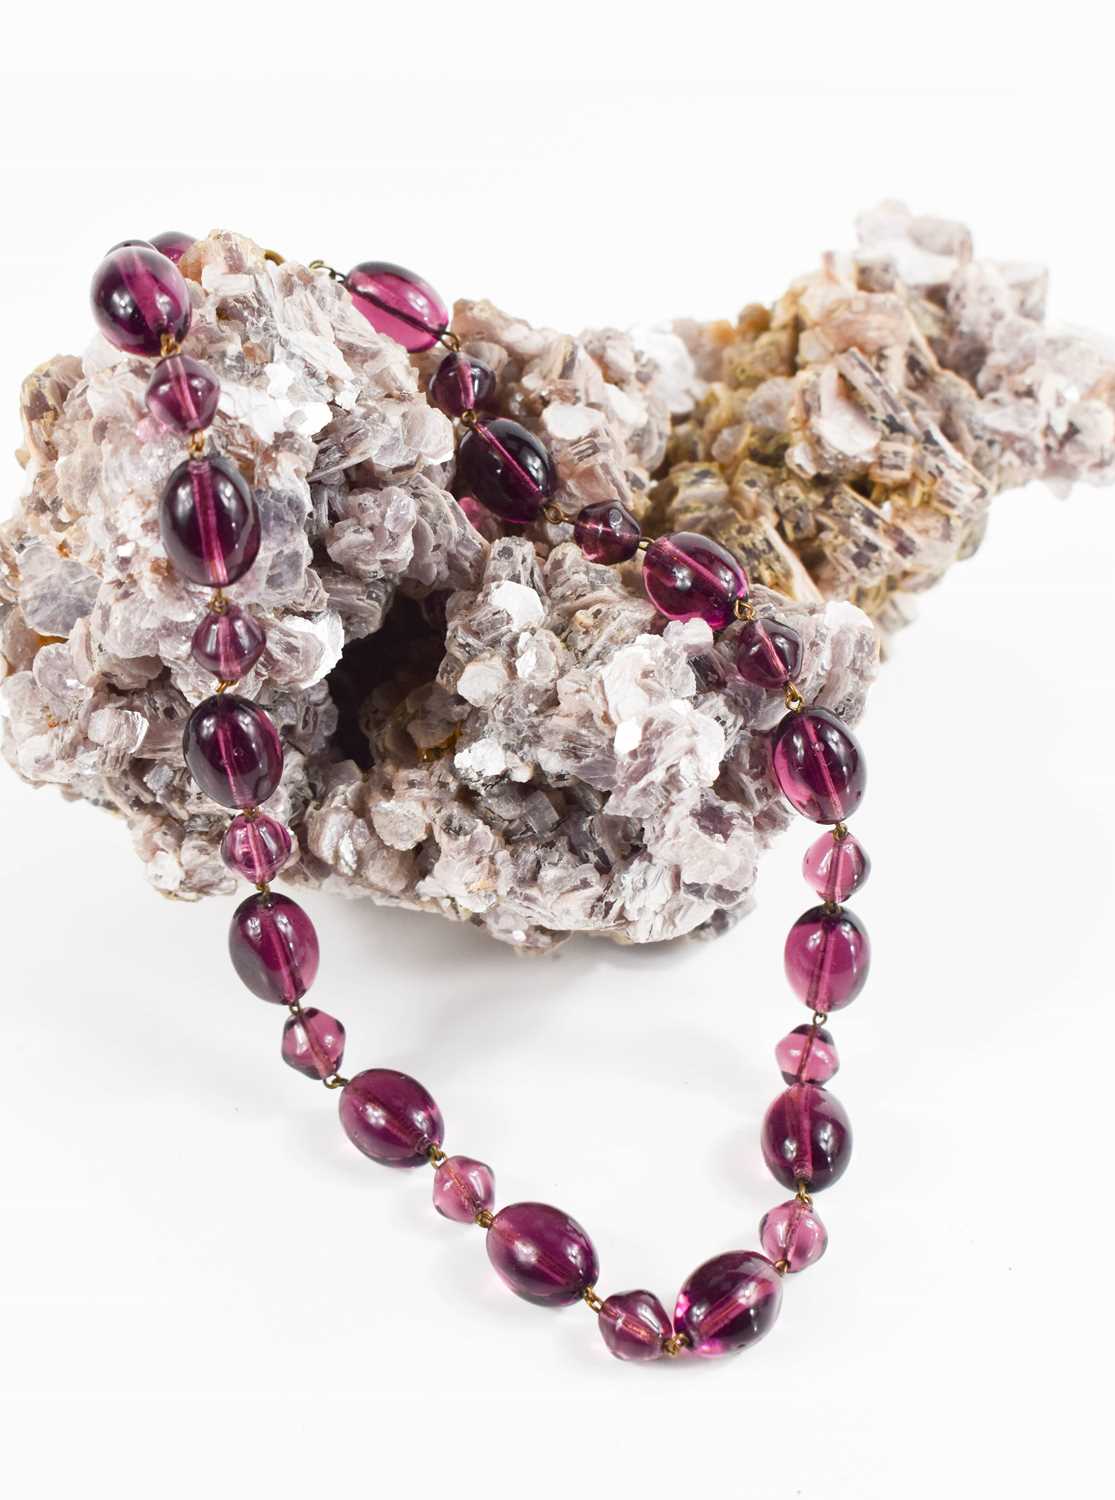 An antique amethyst beaded necklace, 49g, 40cm long. - Image 2 of 3